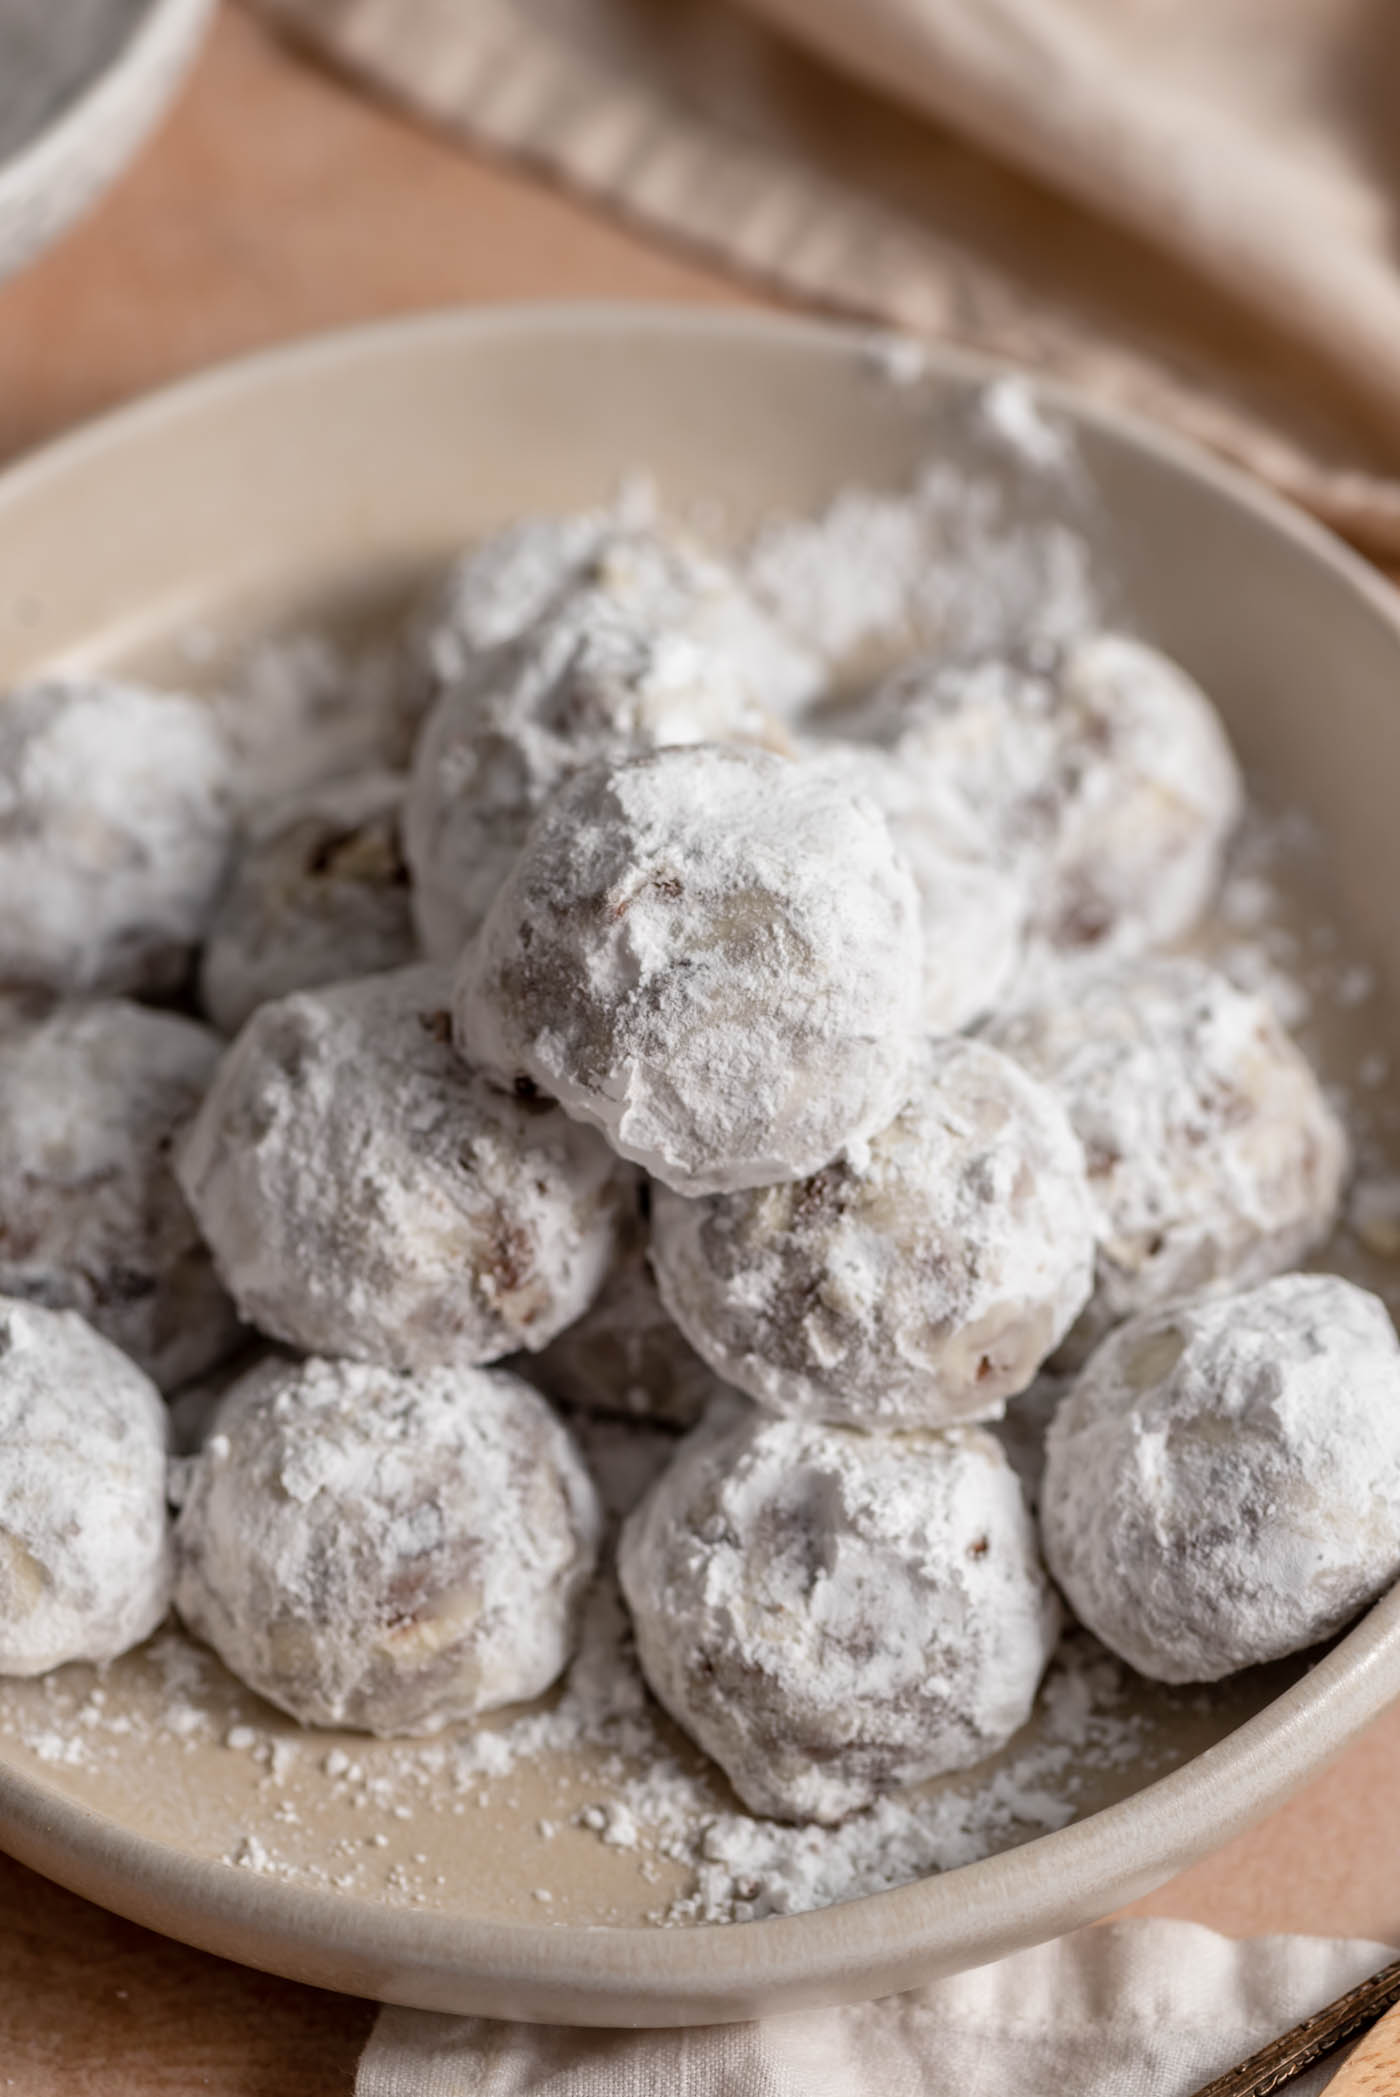 A bowl of chocolate snowball cookies that are coated in confectioners sugar.